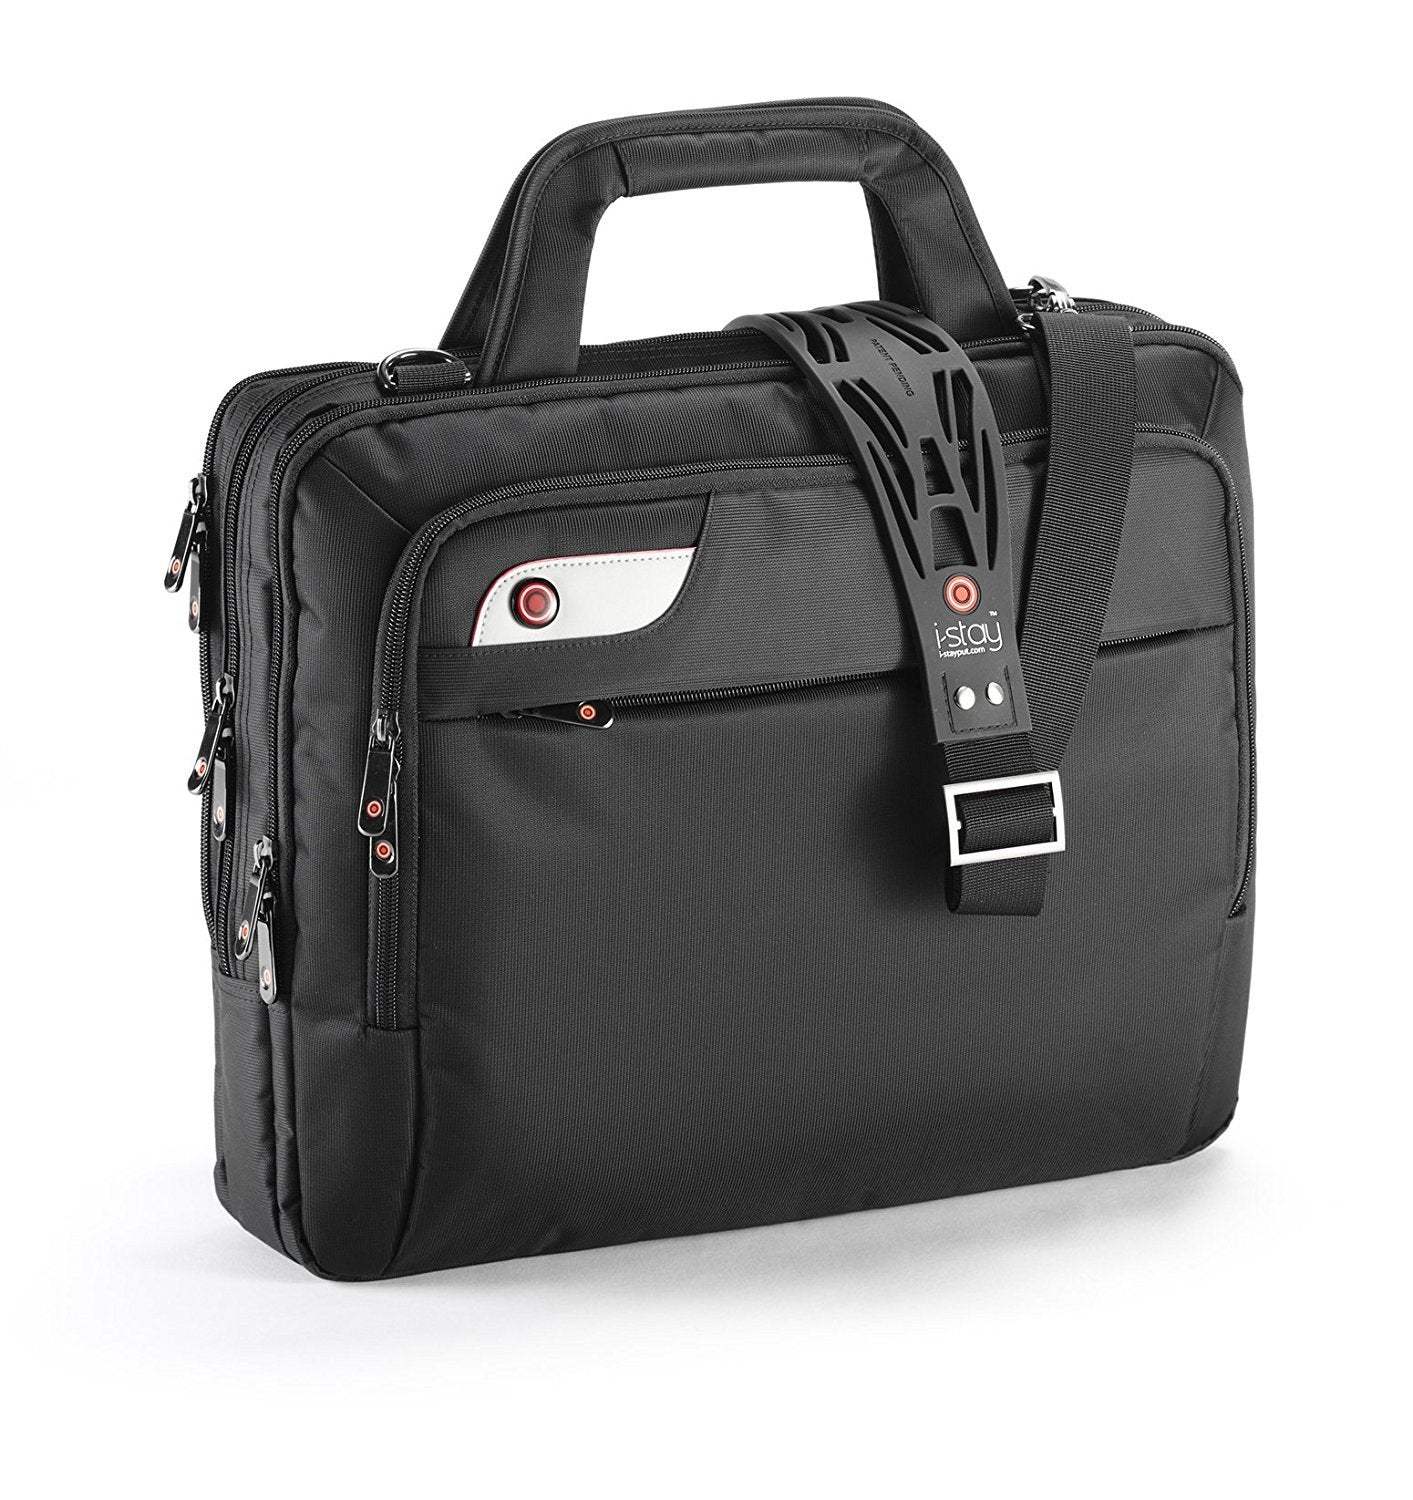 i-stay 15.6-16 inch Laptop Organiser Bag - The Luxury Promotional Gifts Company Limited